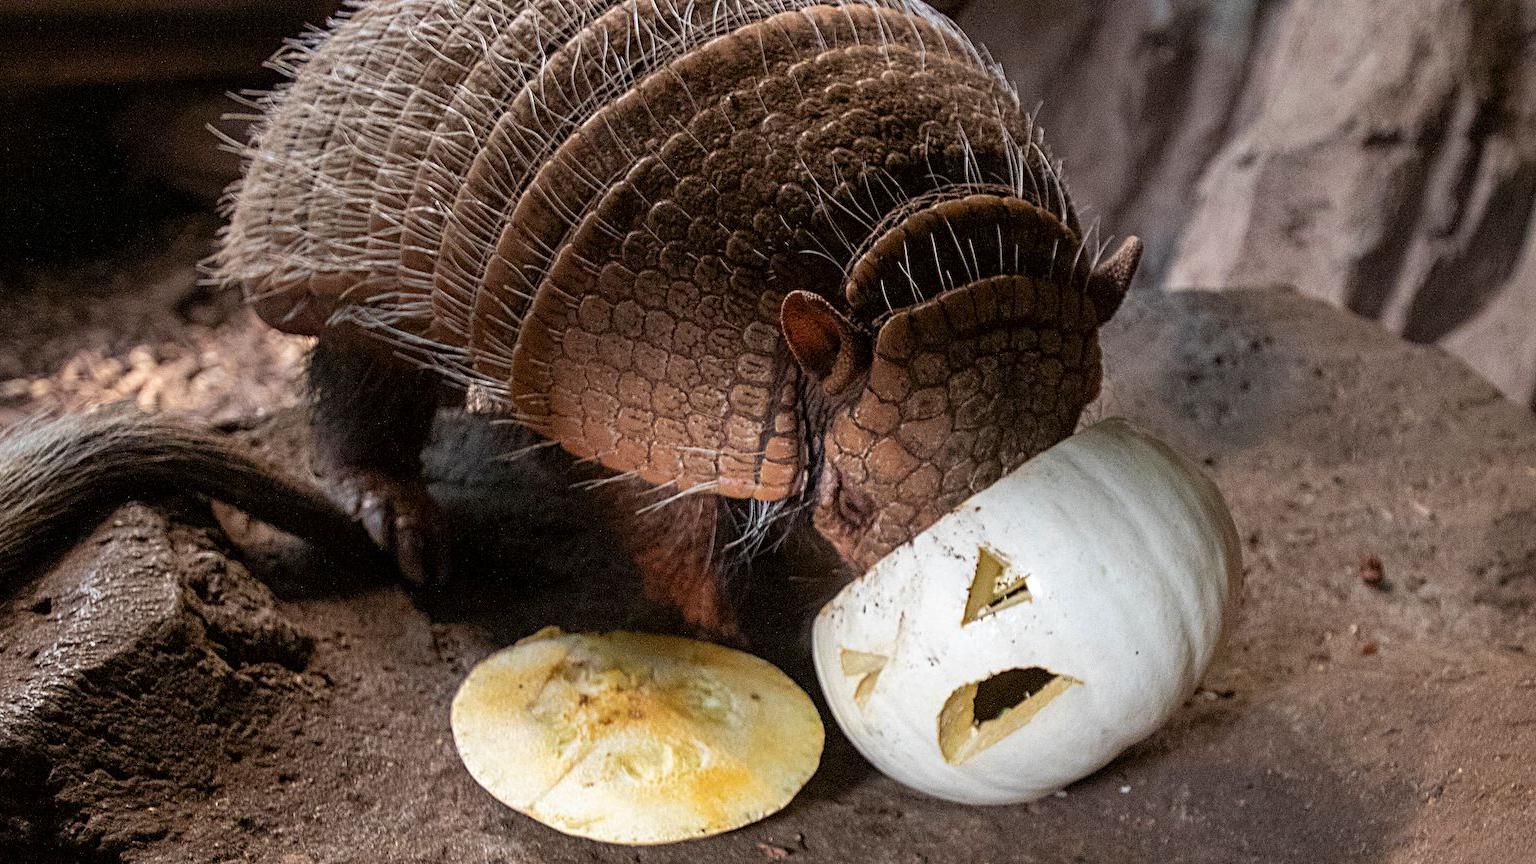 Armadillo with its head in a carved pumpkin